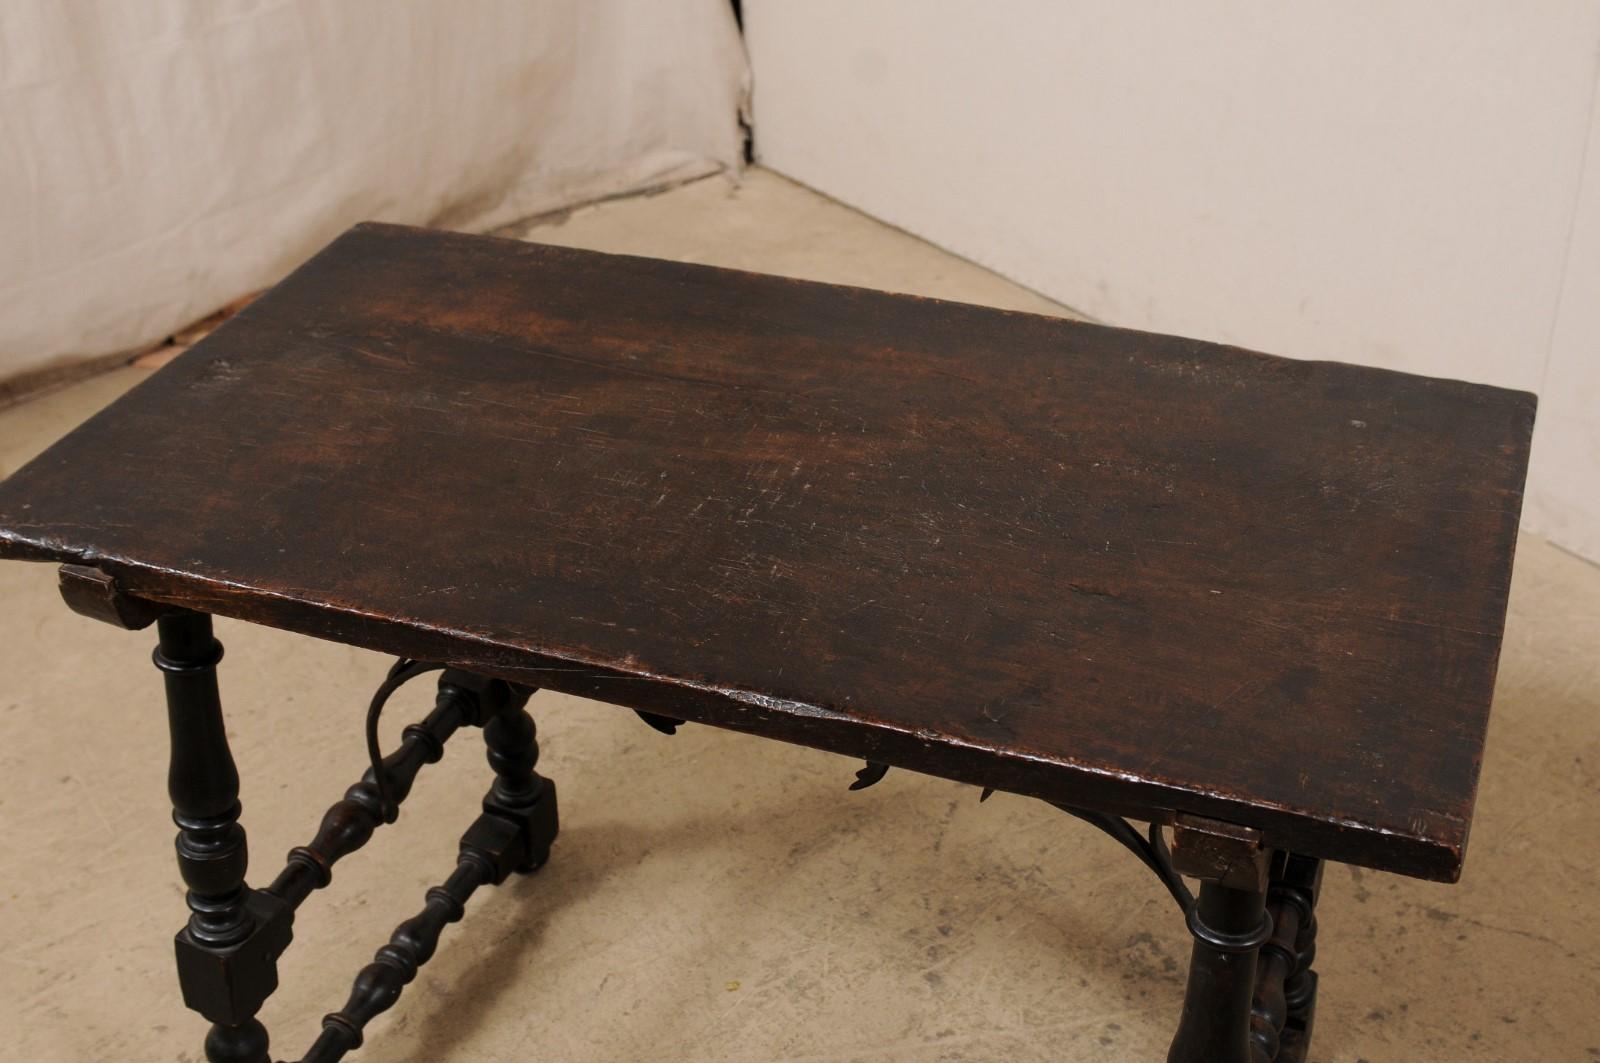 18th c. Italian Wood Table w/ Turned Trestle Legs & Forged Iron Stretcher In Good Condition For Sale In Atlanta, GA